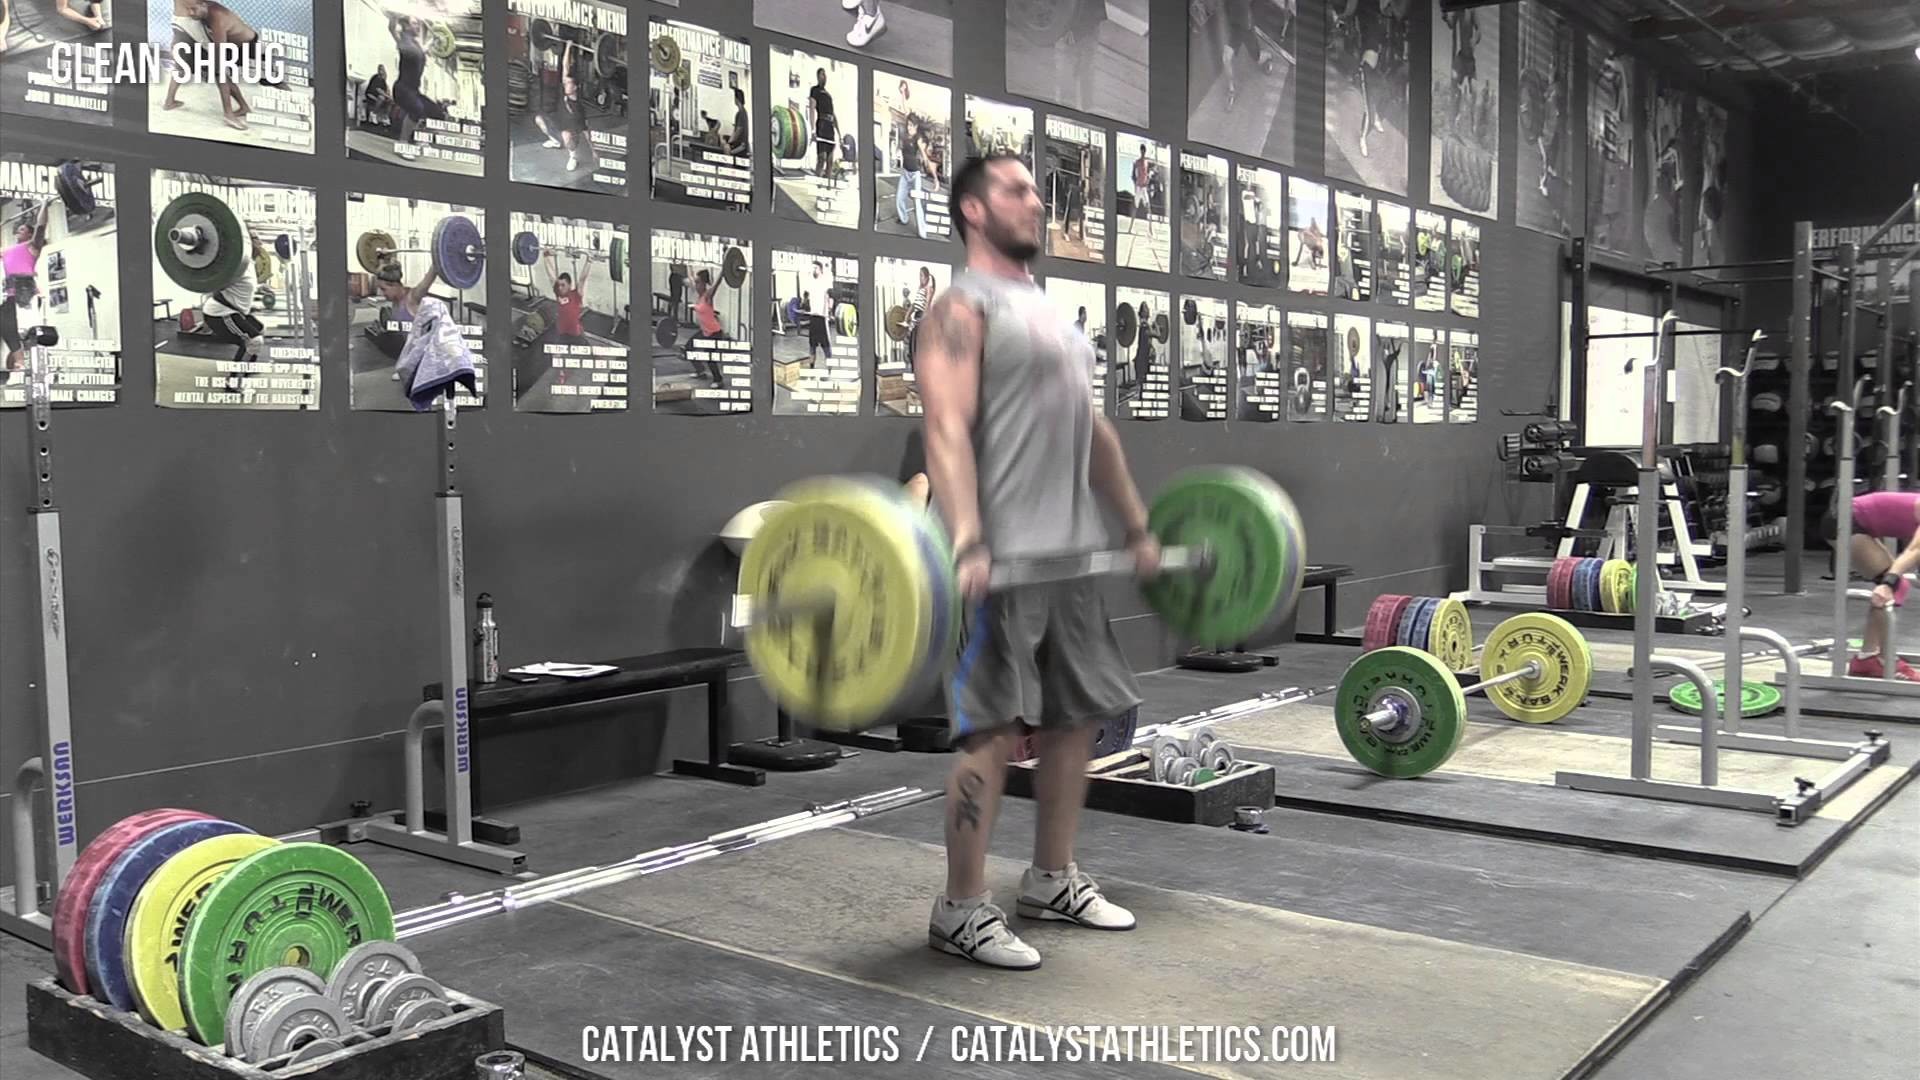 1920x1080 Clean Shrug - Olympic Weightlifting Exercise Library - Catalyst Athletics